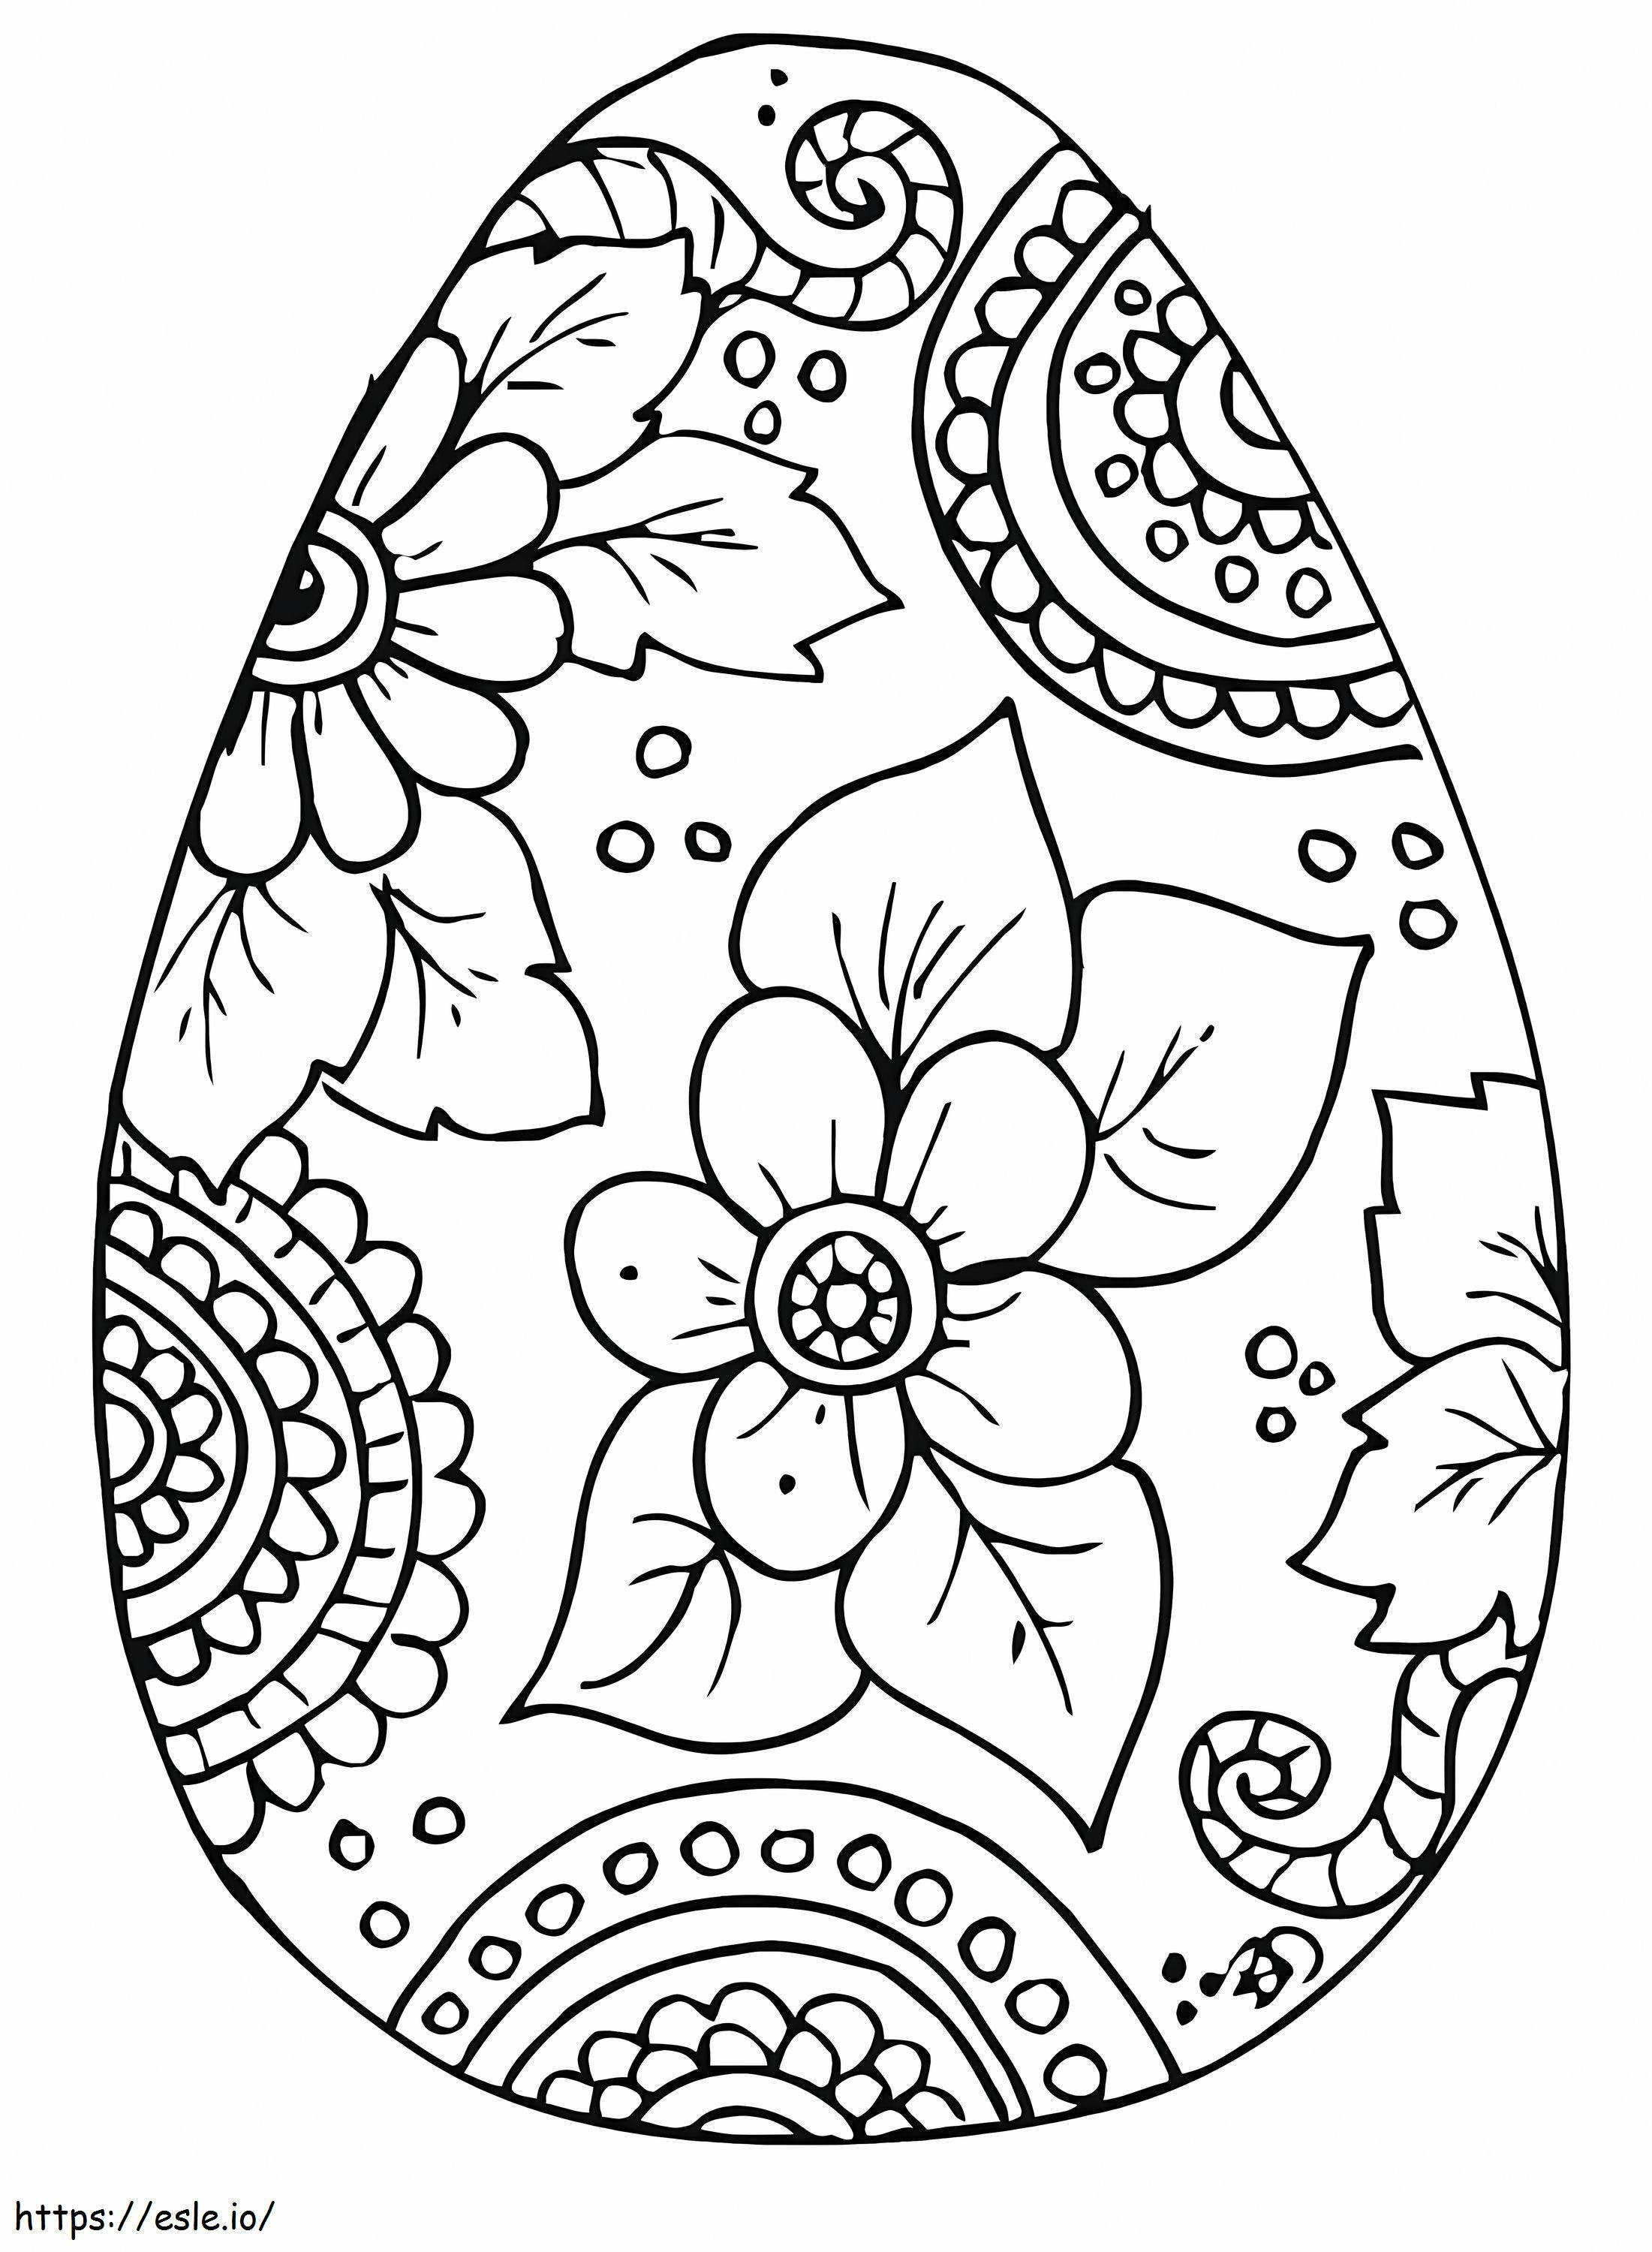 The Easter Egg Is For Adults coloring page